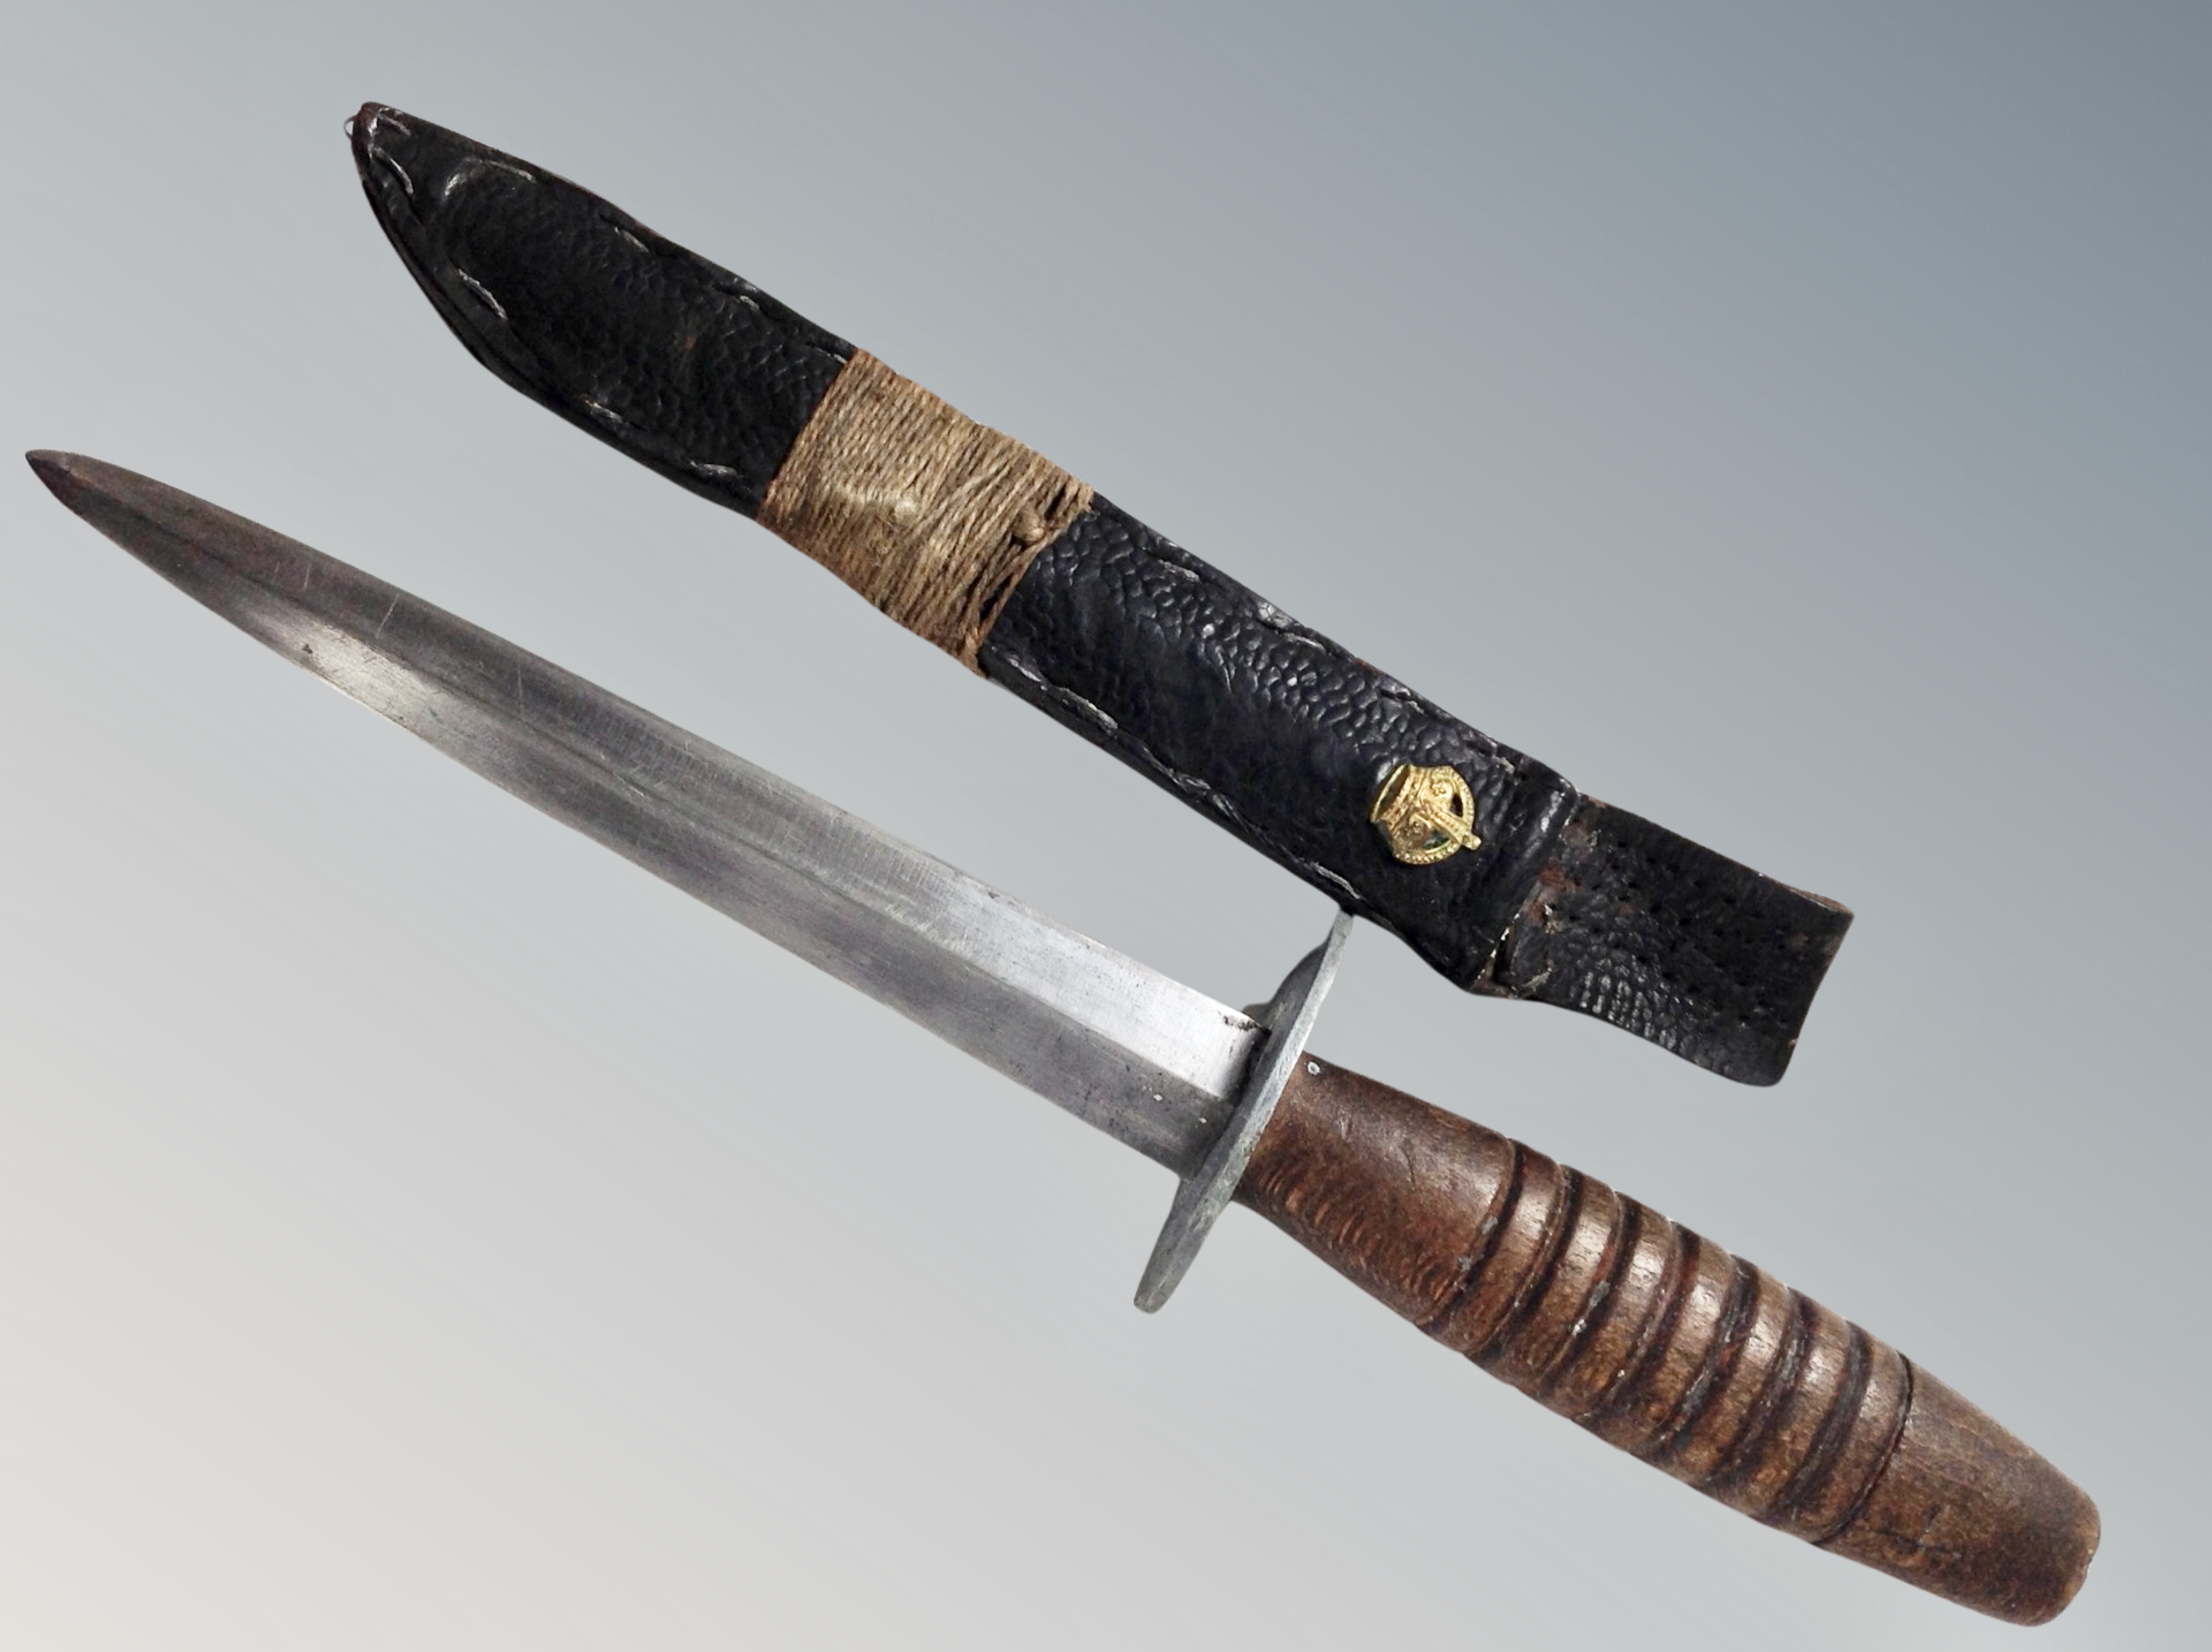 A Fighting style knife in leather sheath